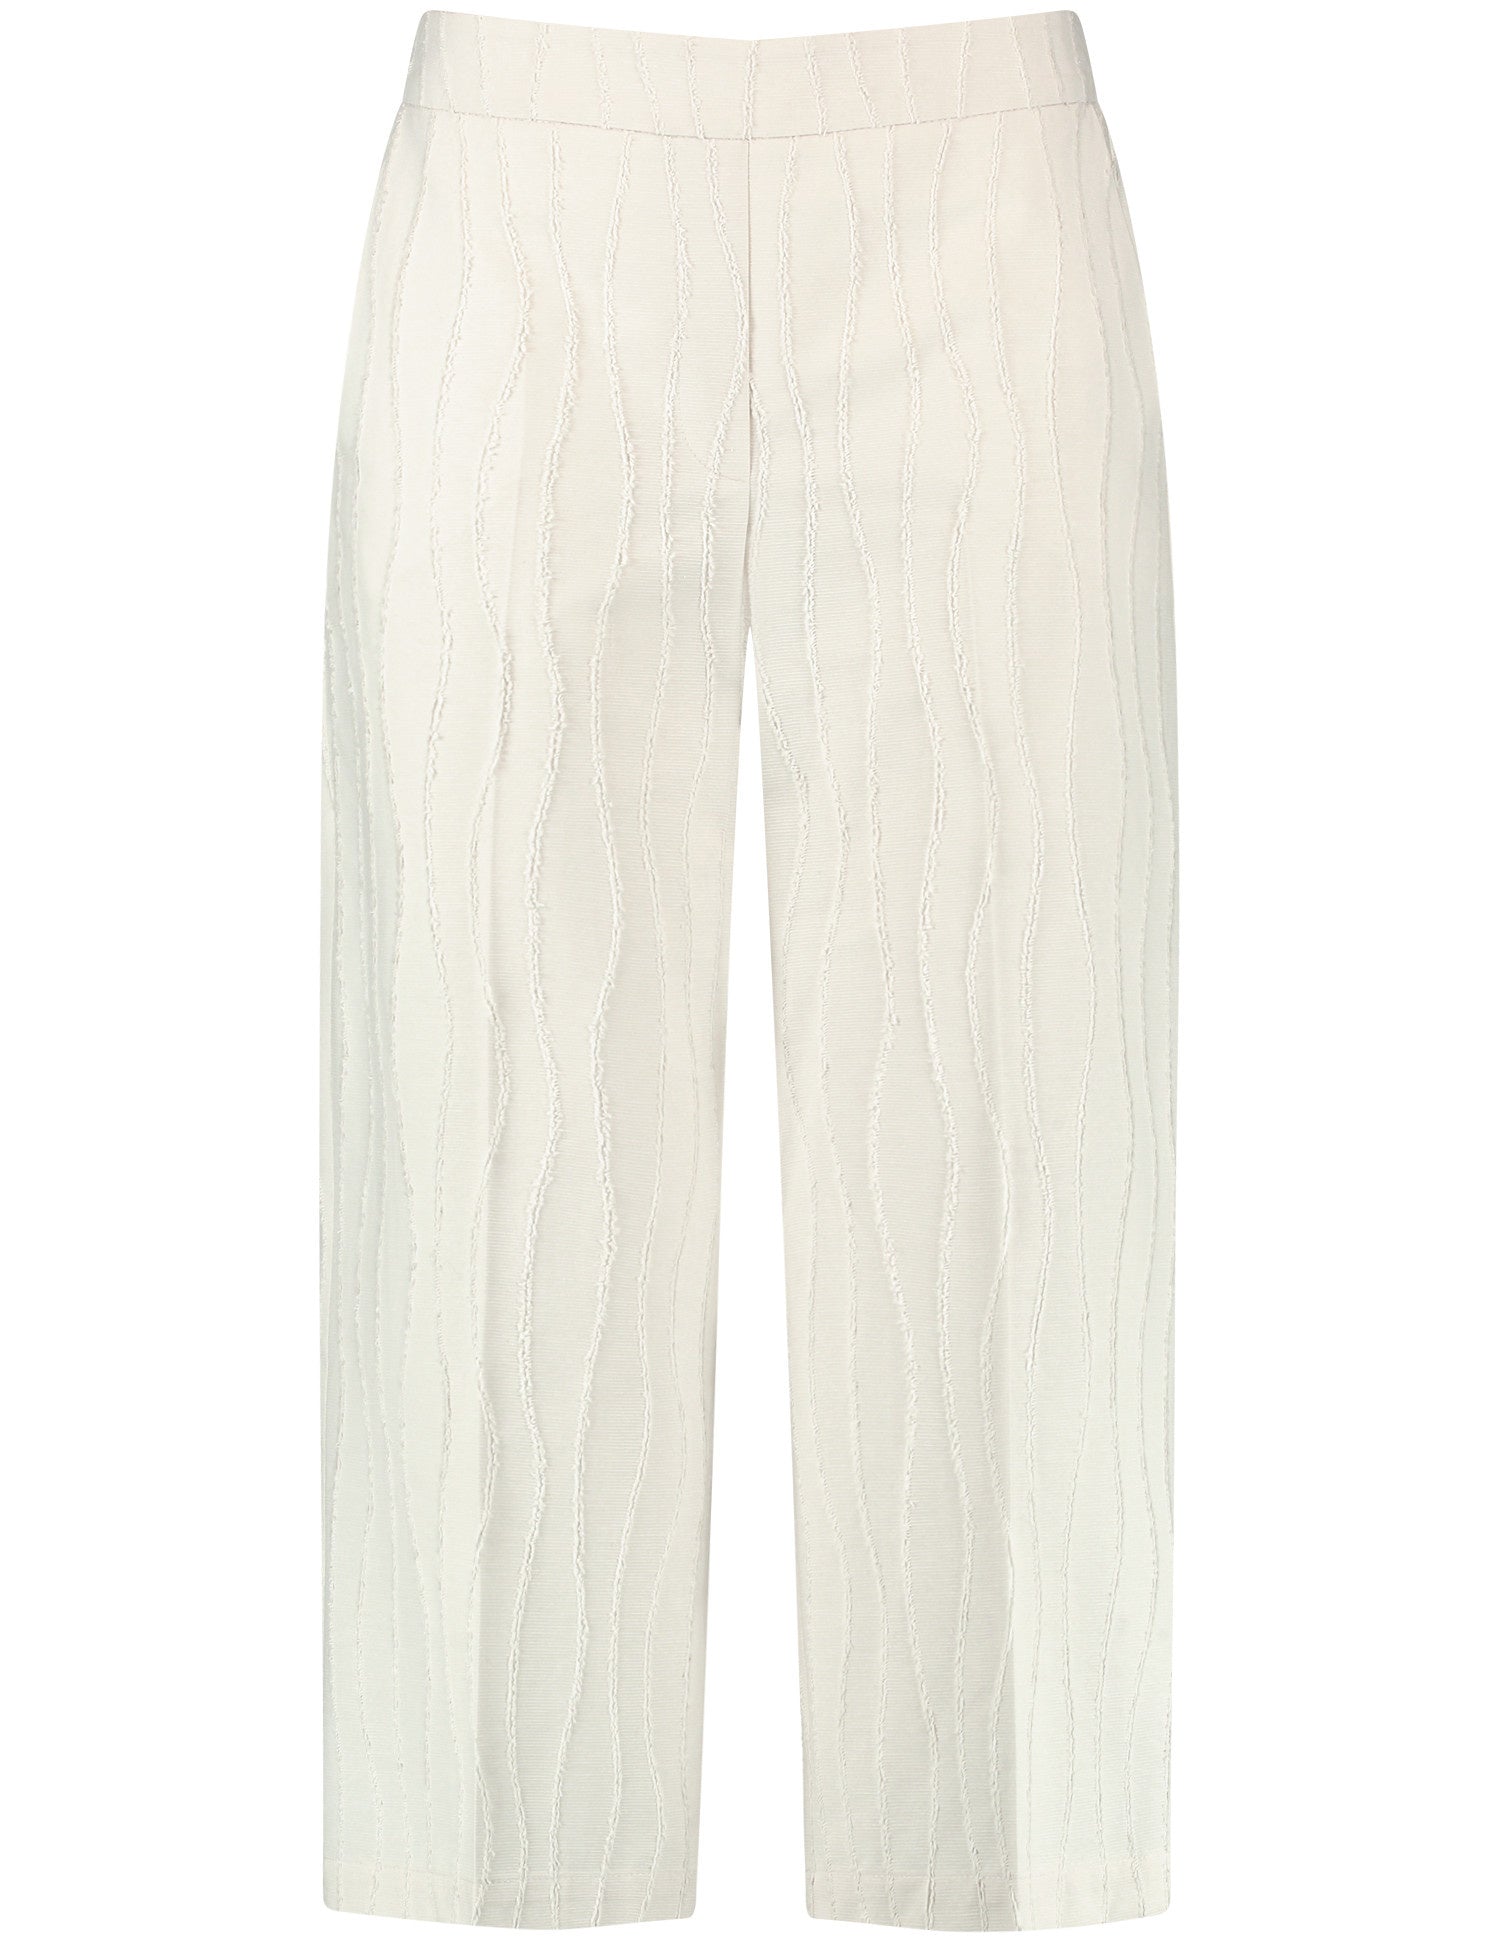 Textured Culottes With A Wide, 3/4 Leg